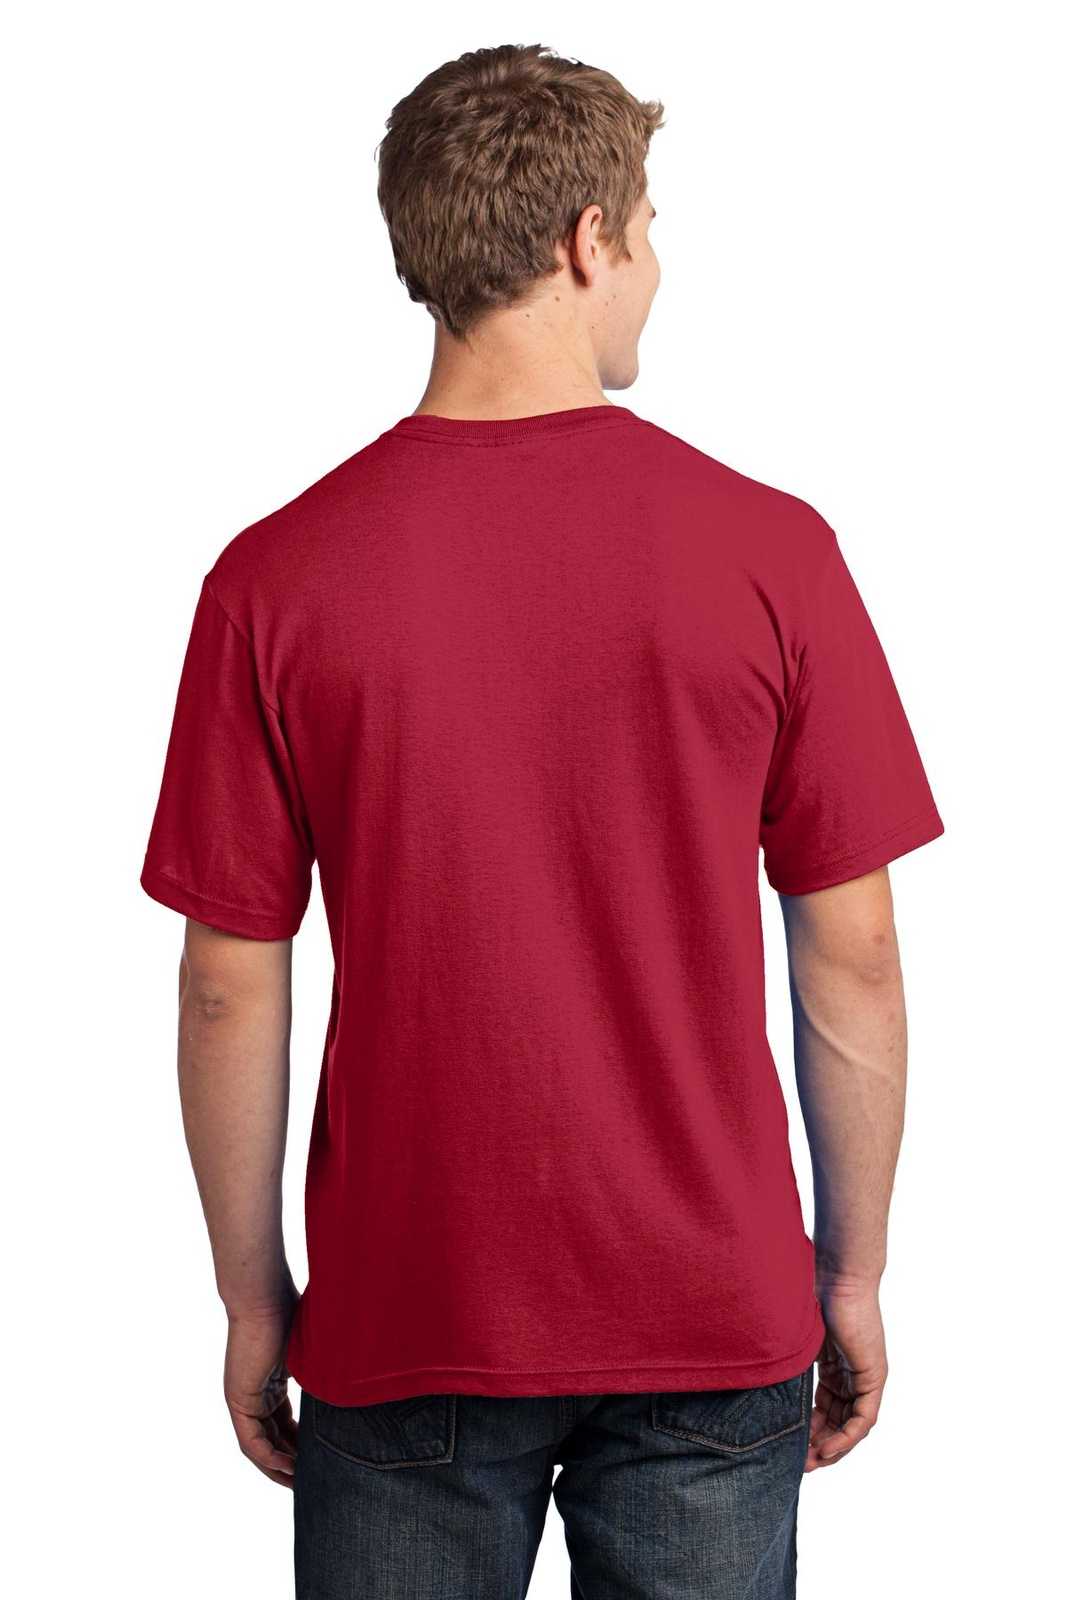 Port & Company USA100P All-American Pocket Tee - Red - HIT a Double - 1